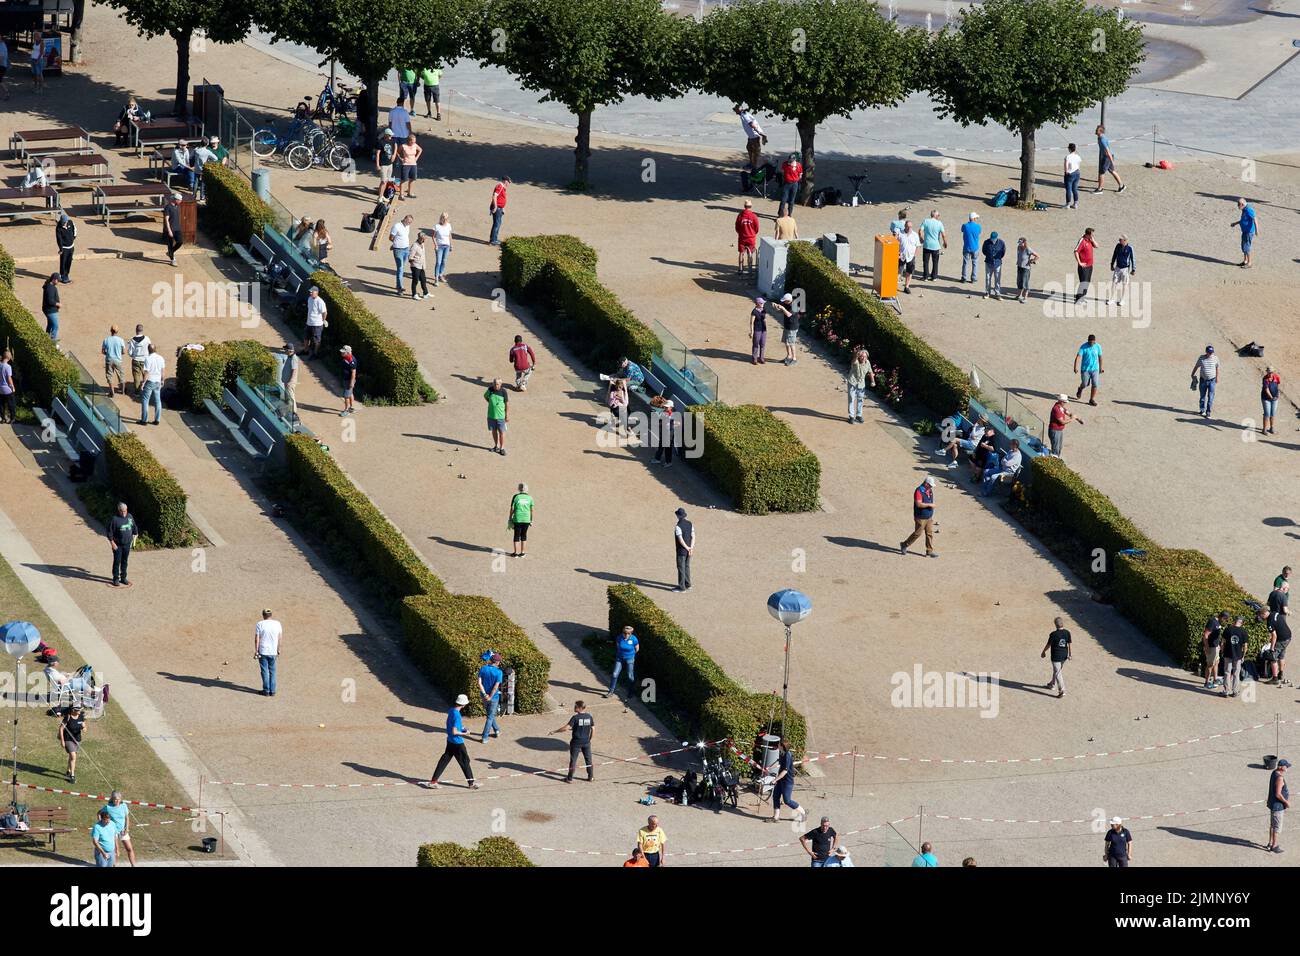 07 August 2022, Schleswig-Holstein, Lübeck: Participants of the Holstentorturnier can be seen on the beach promenade. The Holstentorturnier is considered the largest German boules tournament. Photo: Georg Wendt/dpa Stock Photo